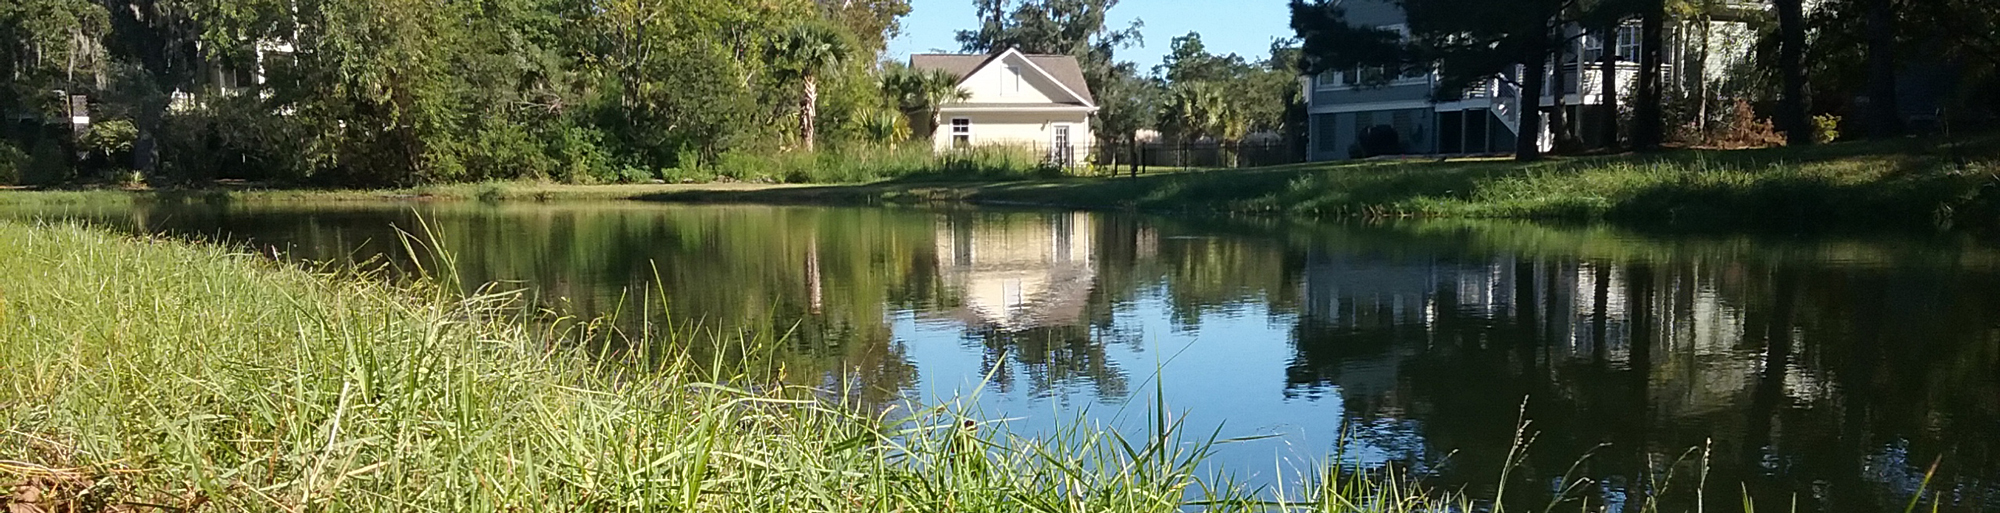 A stormwater pond with houses in the background.